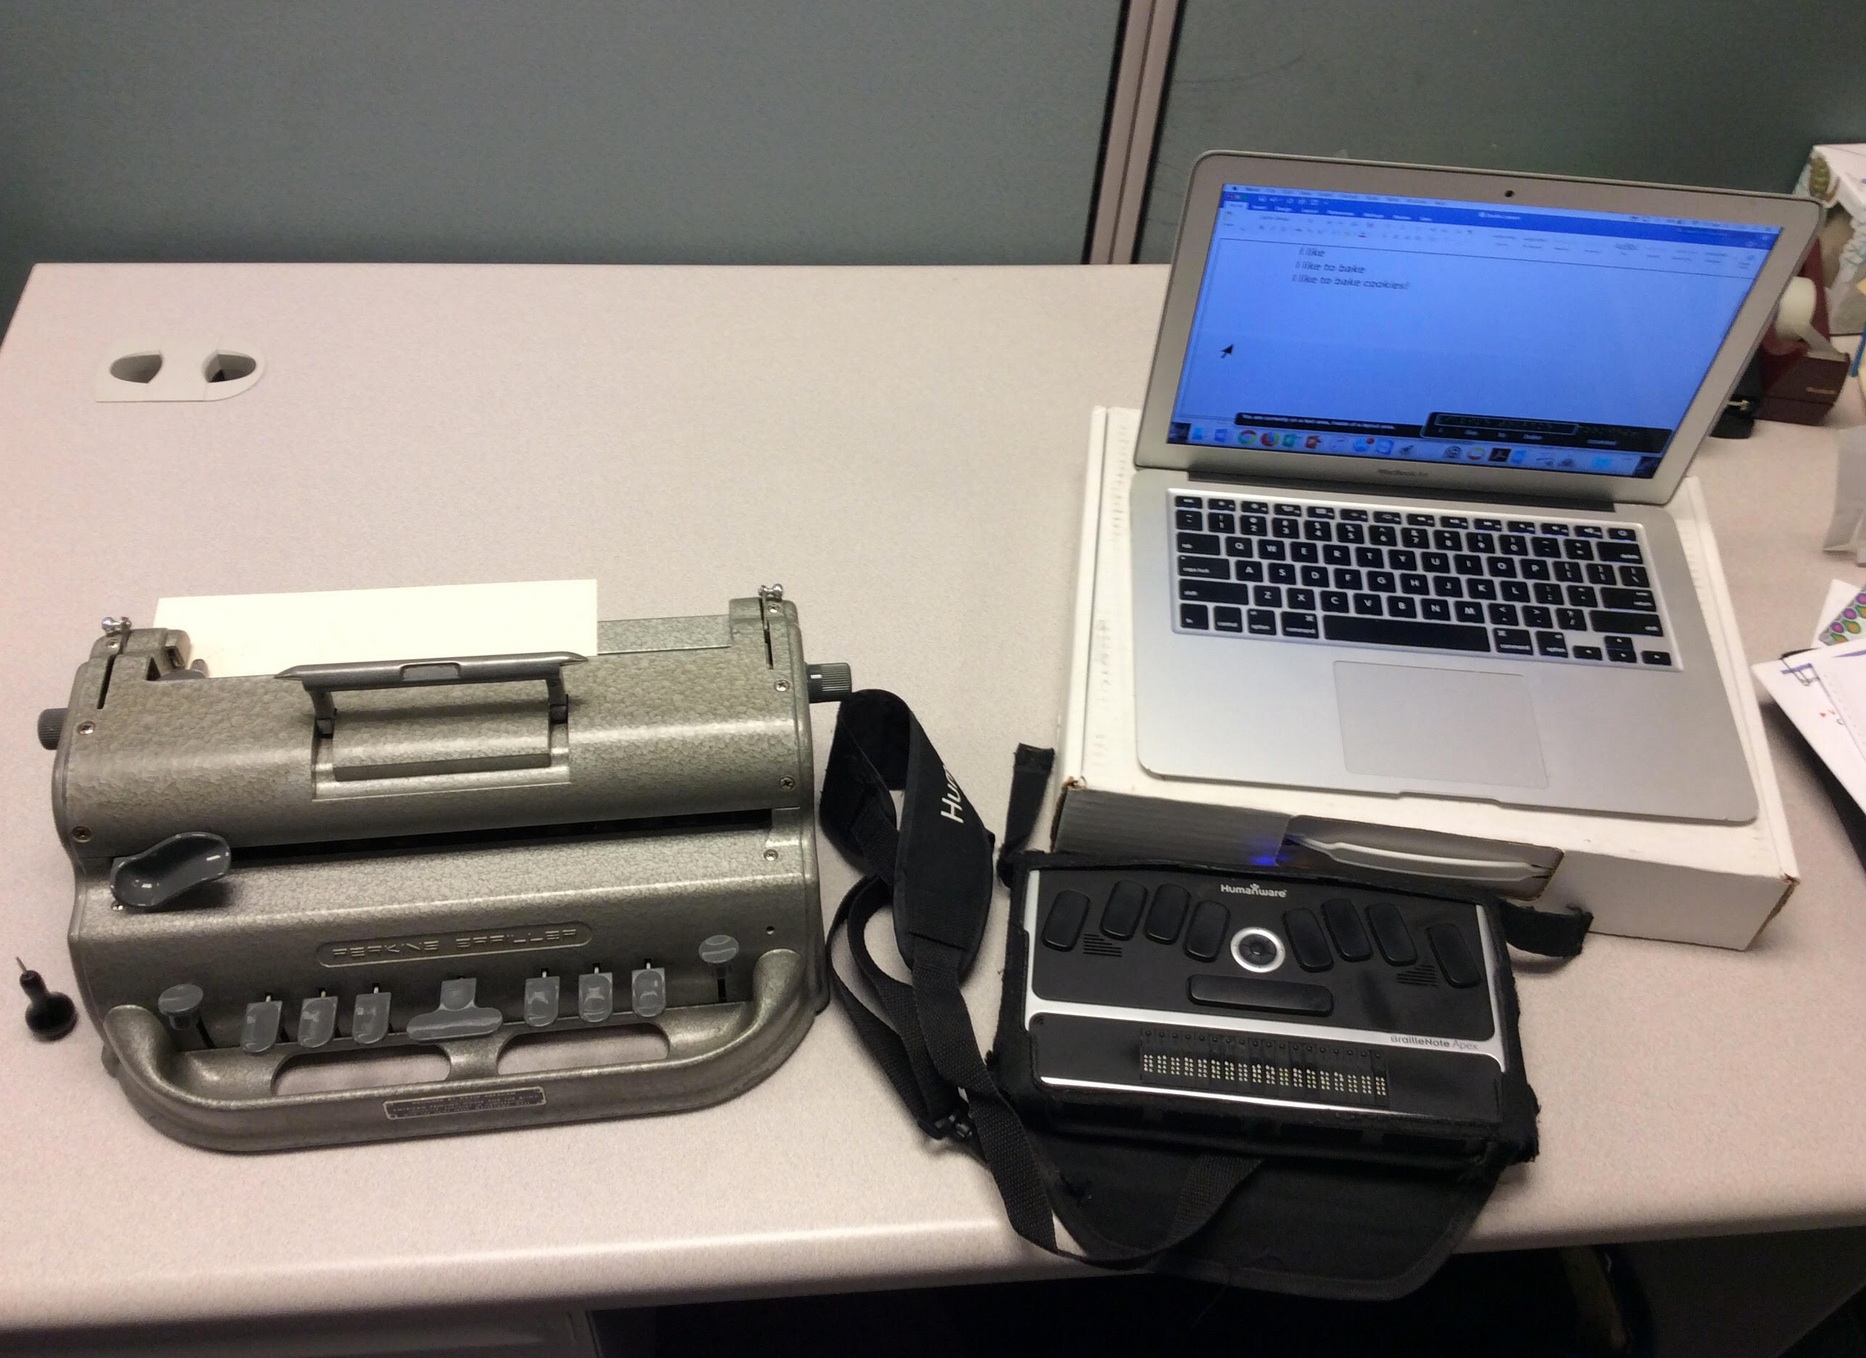  braillewriter, braille eraser, and a braille notetaker paired with a computer.  The braille display reads “I like to bake”.”